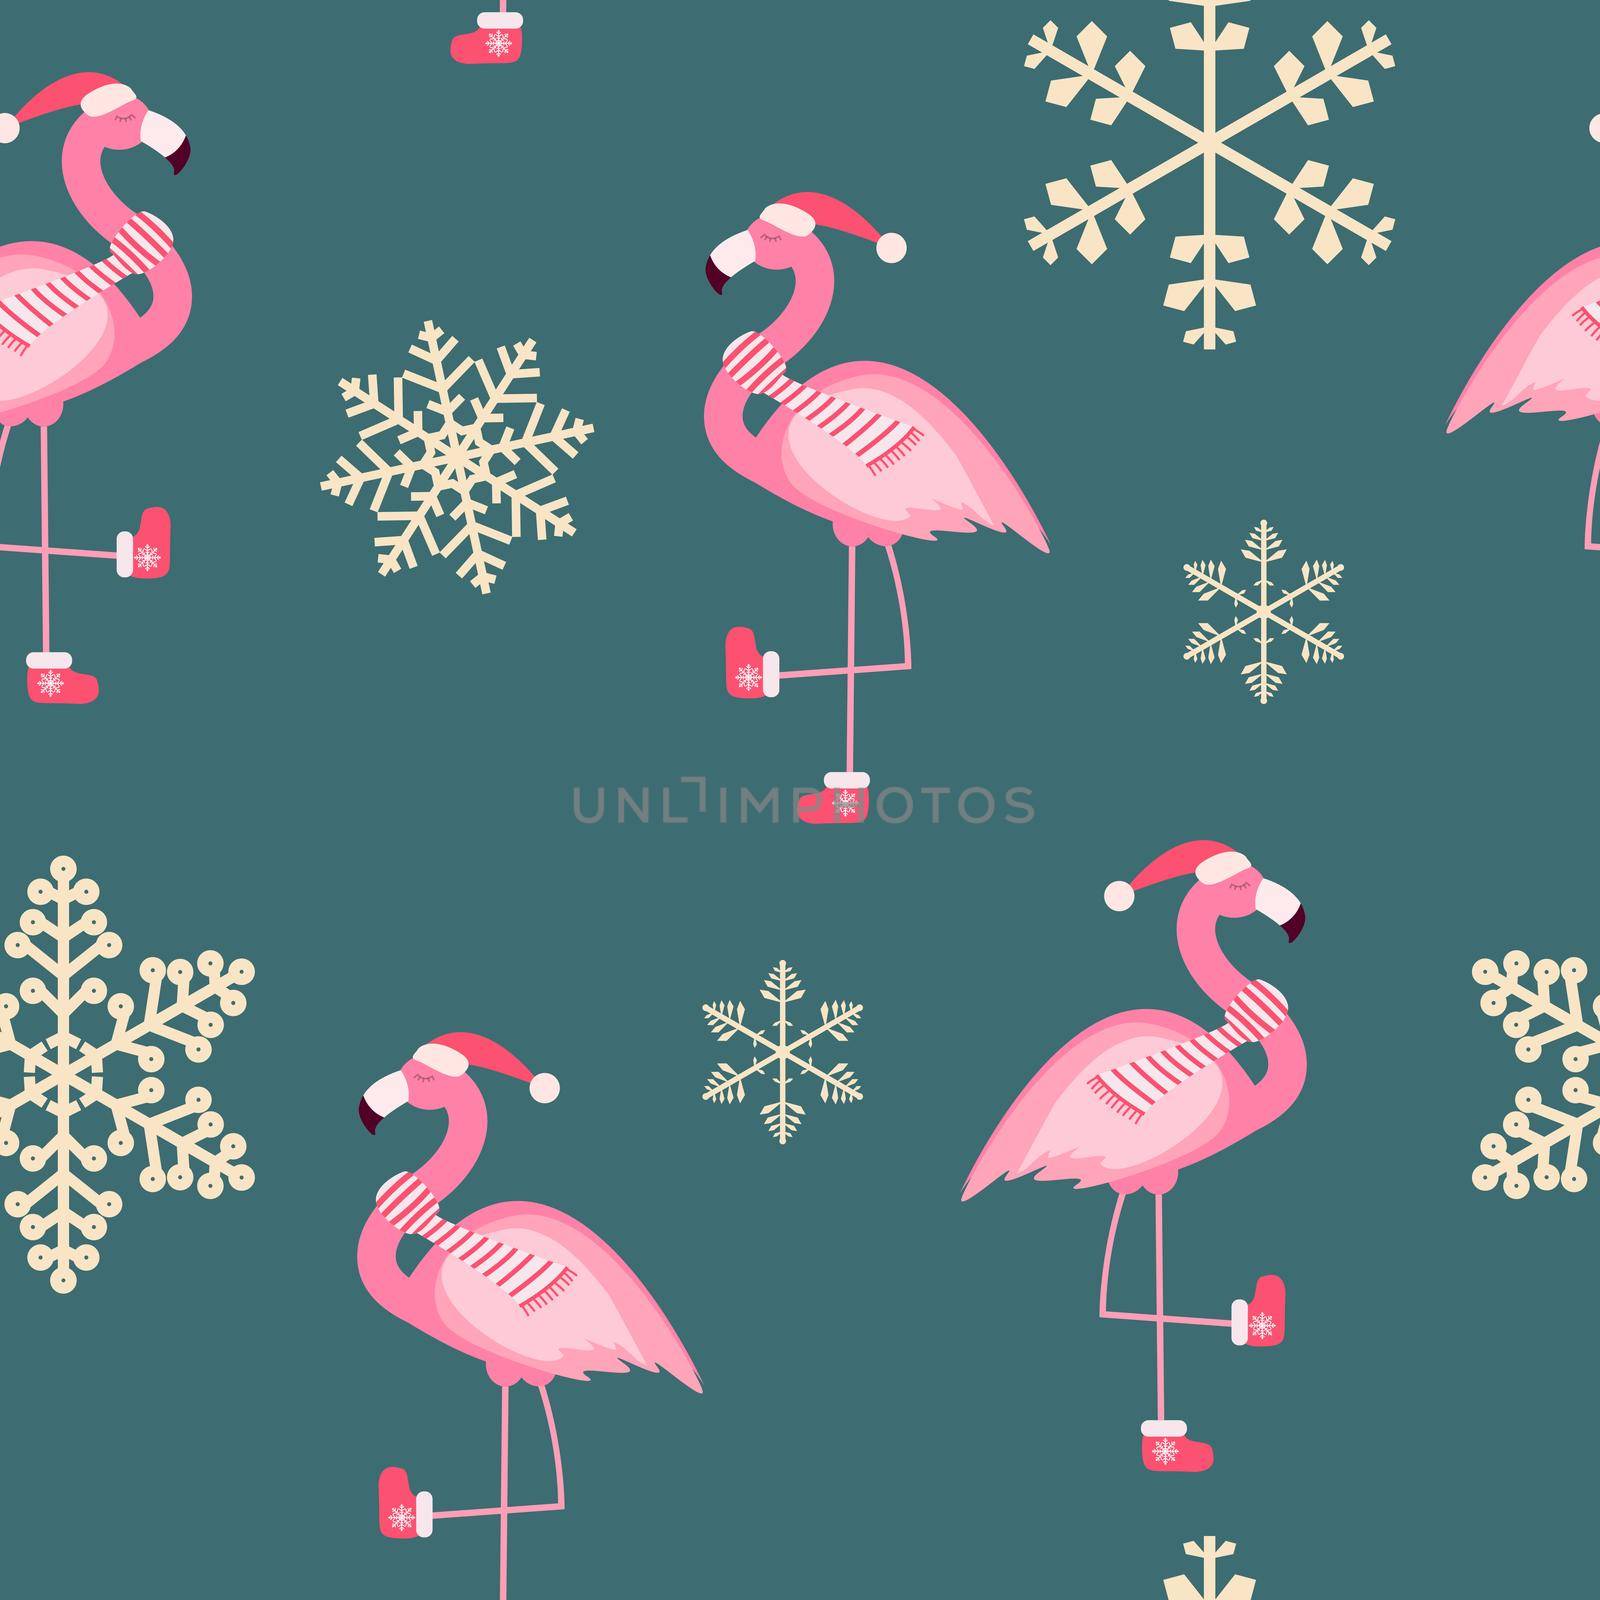 Cute Pink Flamingo New Year and Christmas Seamless Pattern Background Vector Illustration EPS10